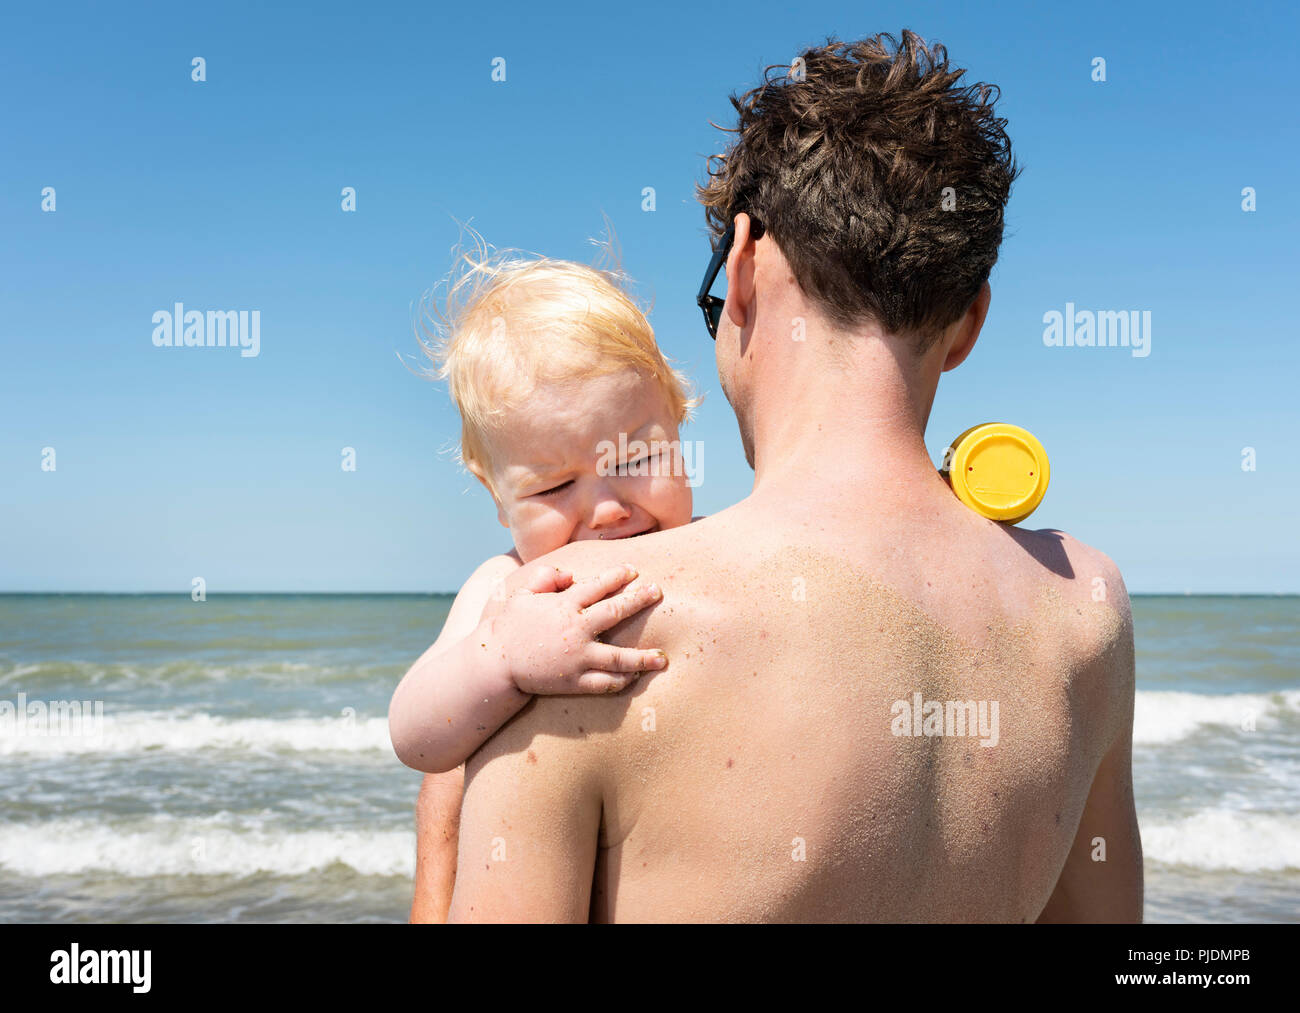 Toddler finds comfort with father on beach Stock Photo